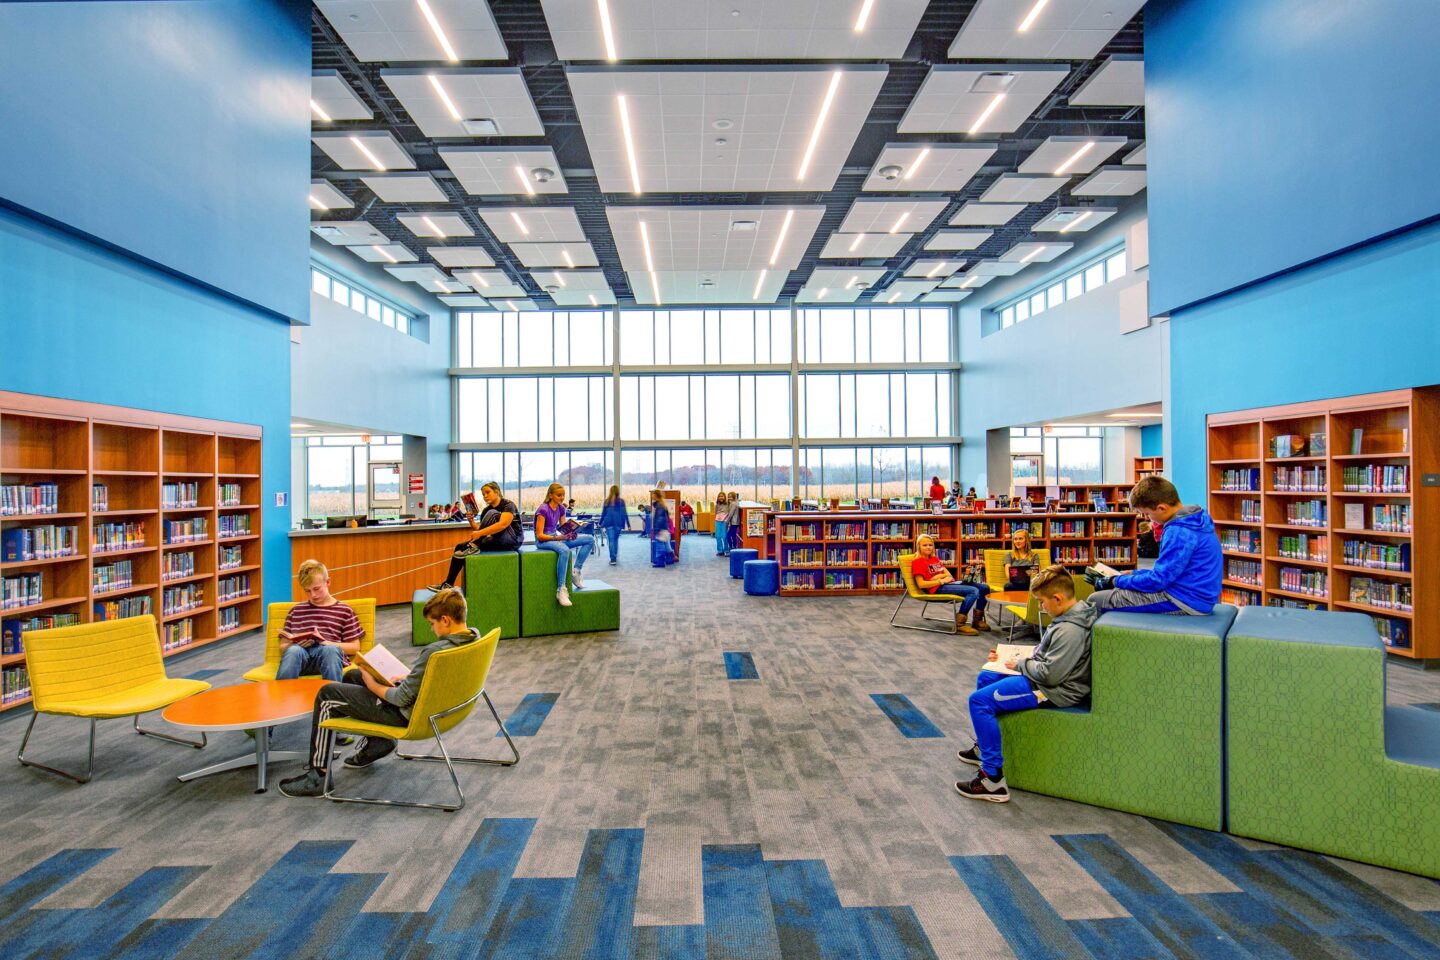 A view of the library anchored by the expansive floor-to-ceiling windows that allow abundant daylight into the space